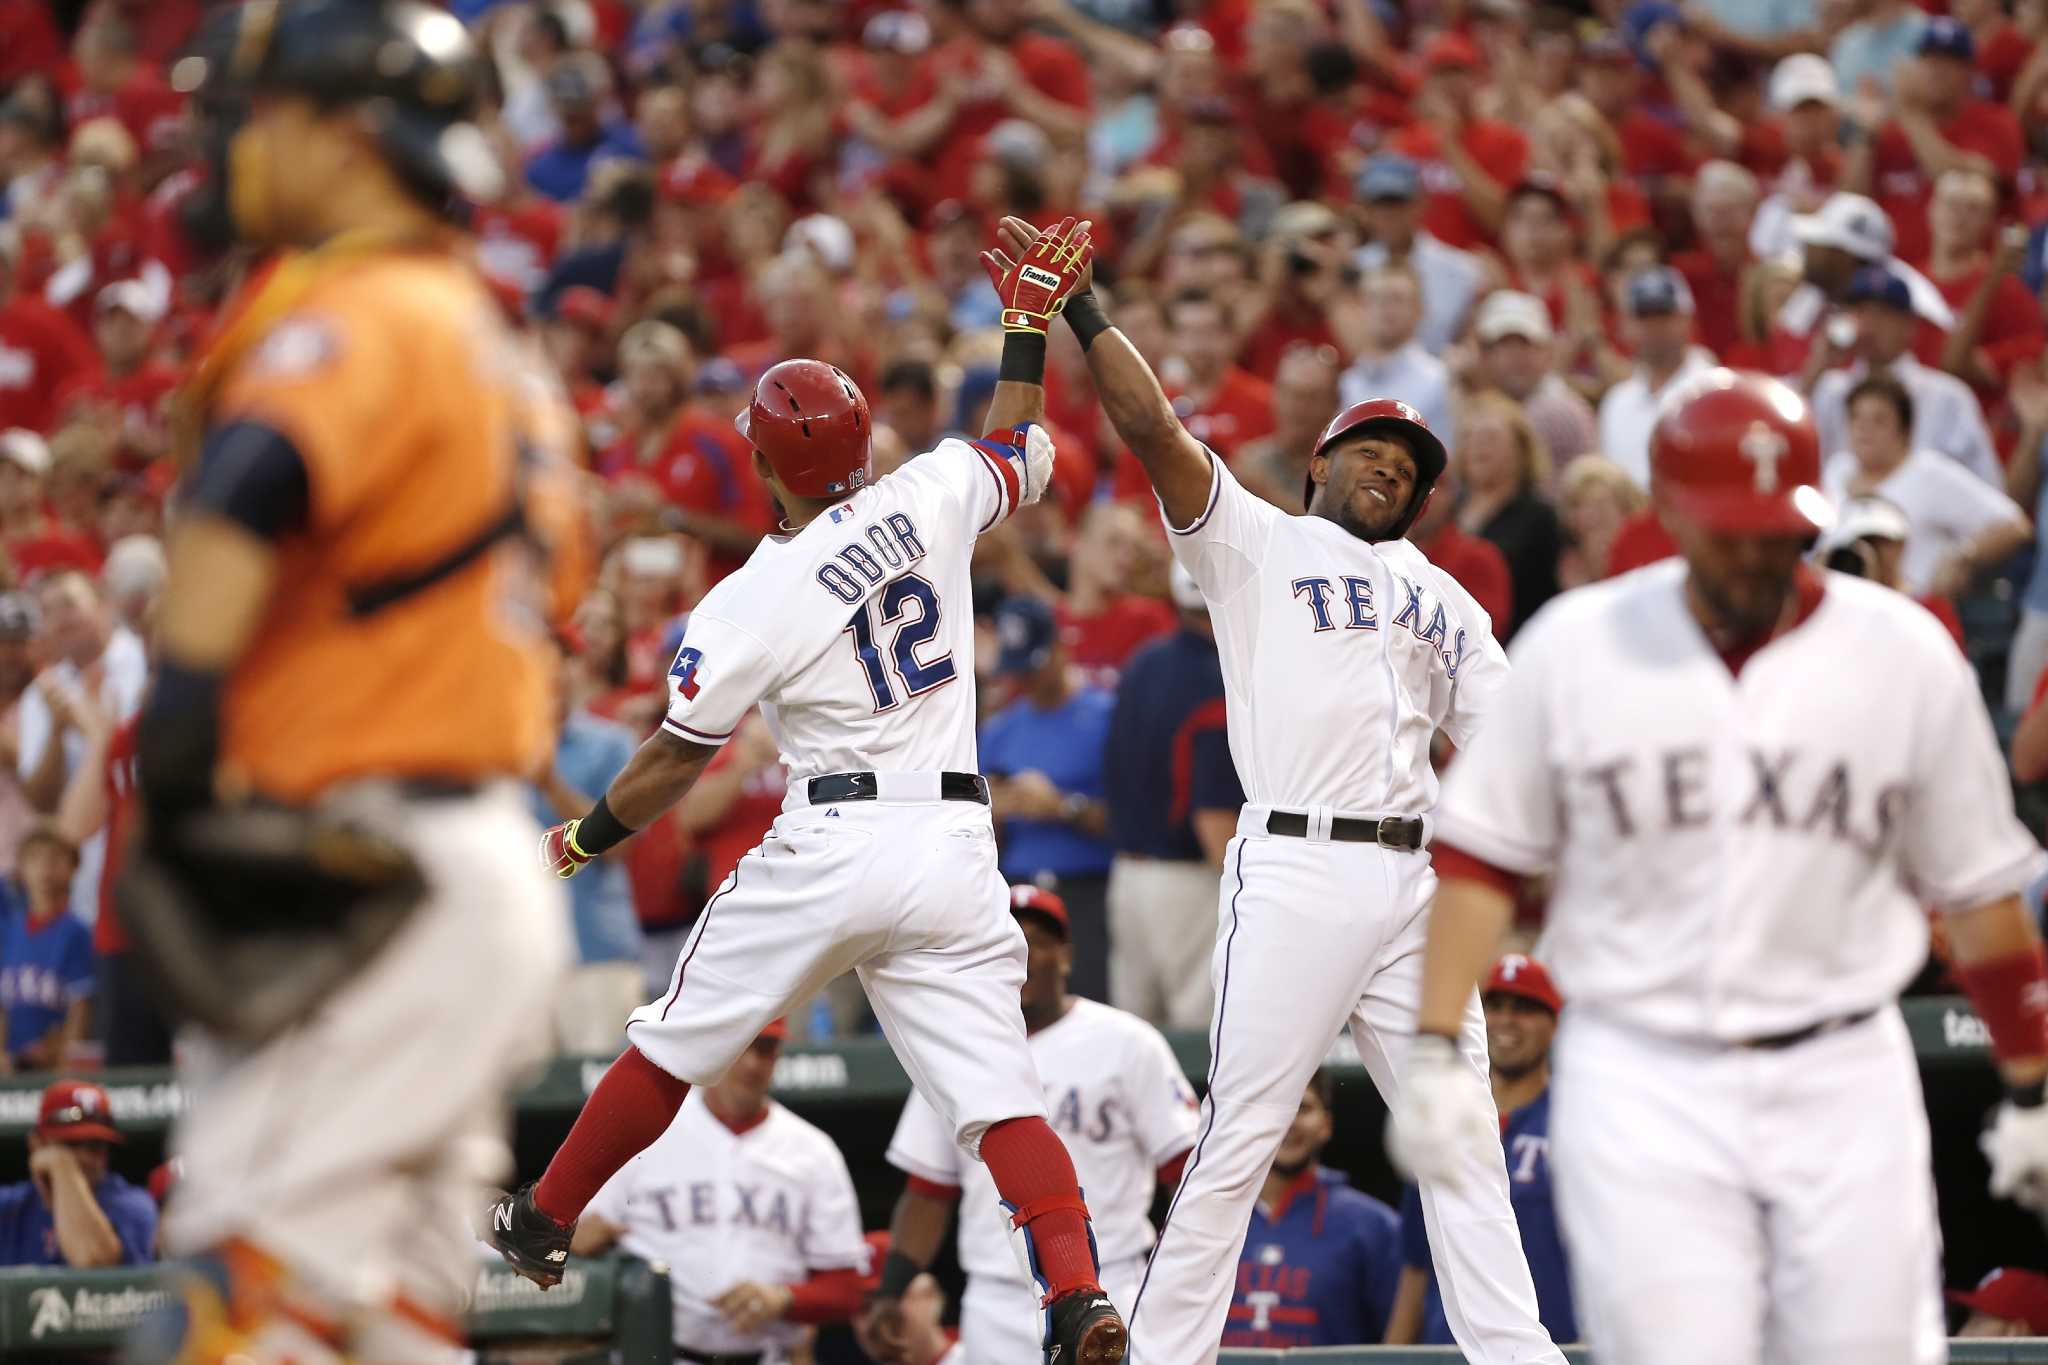 Elvis Andrus and Rougned Odor were so excited about the sweep